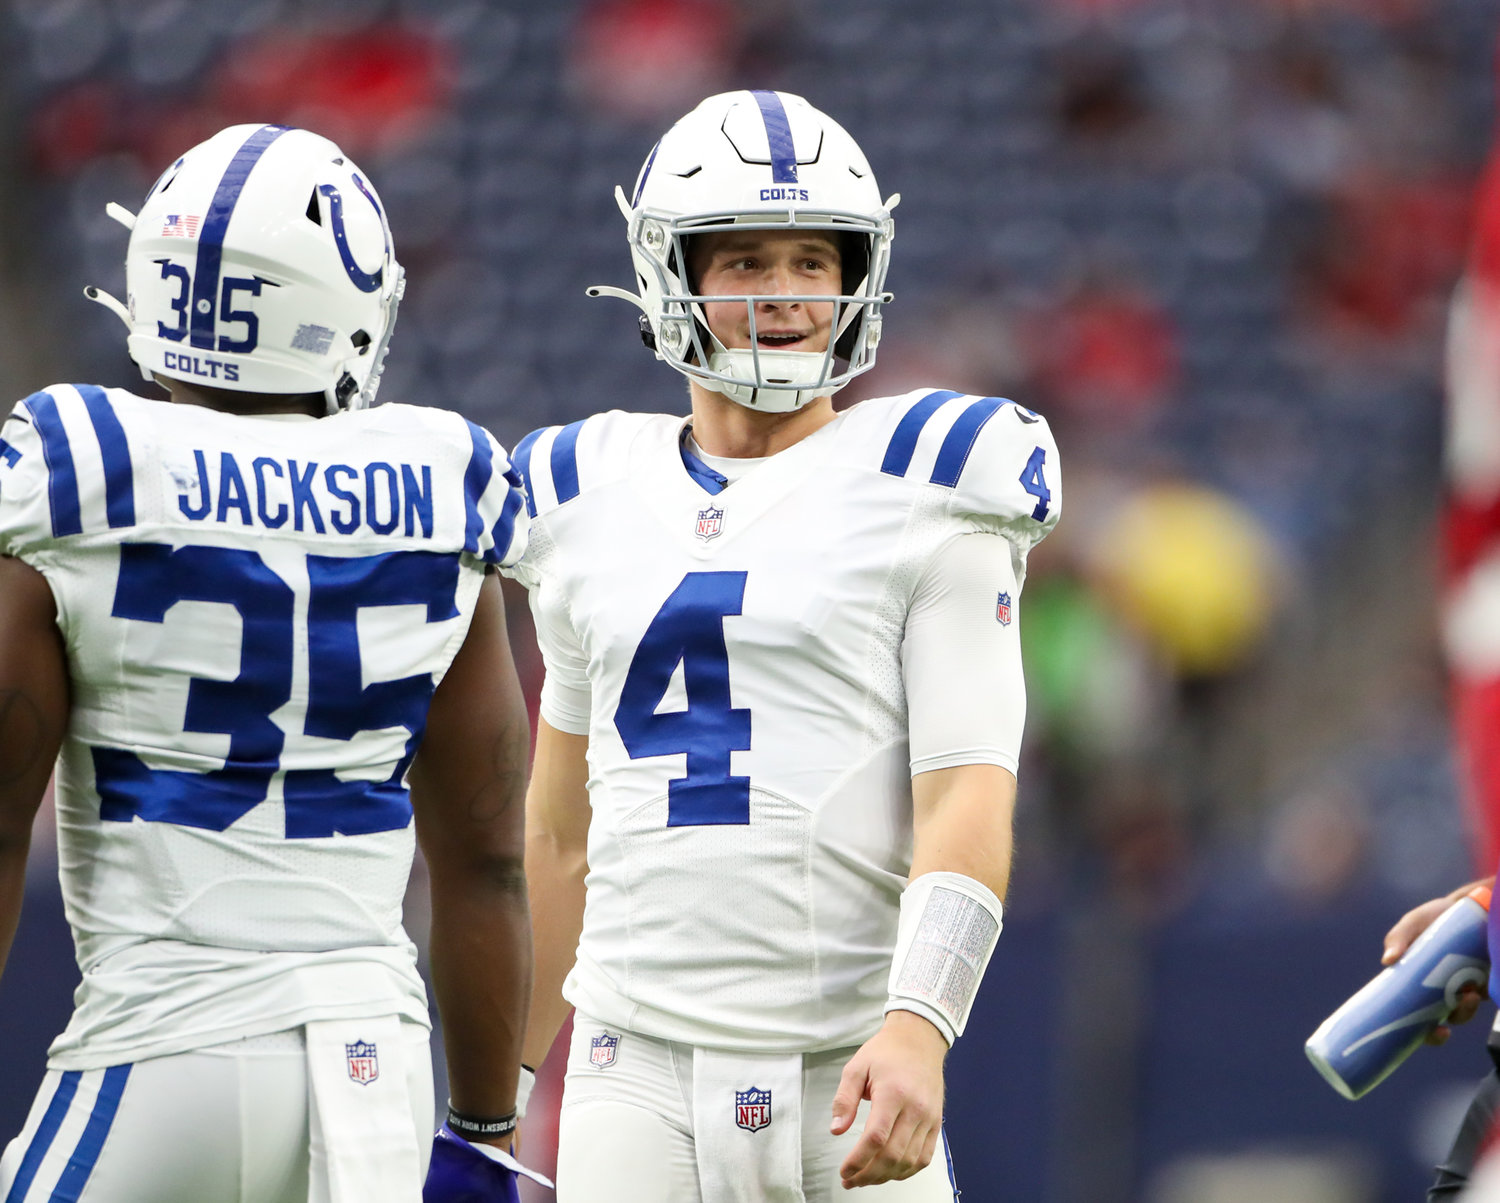 Indianapolis Colts quarterback Sam Ehlinger (4) during an NFL game between the Texans and the Colts on December 5, 2021 in Houston, Texas. The Colts won, 31-0.